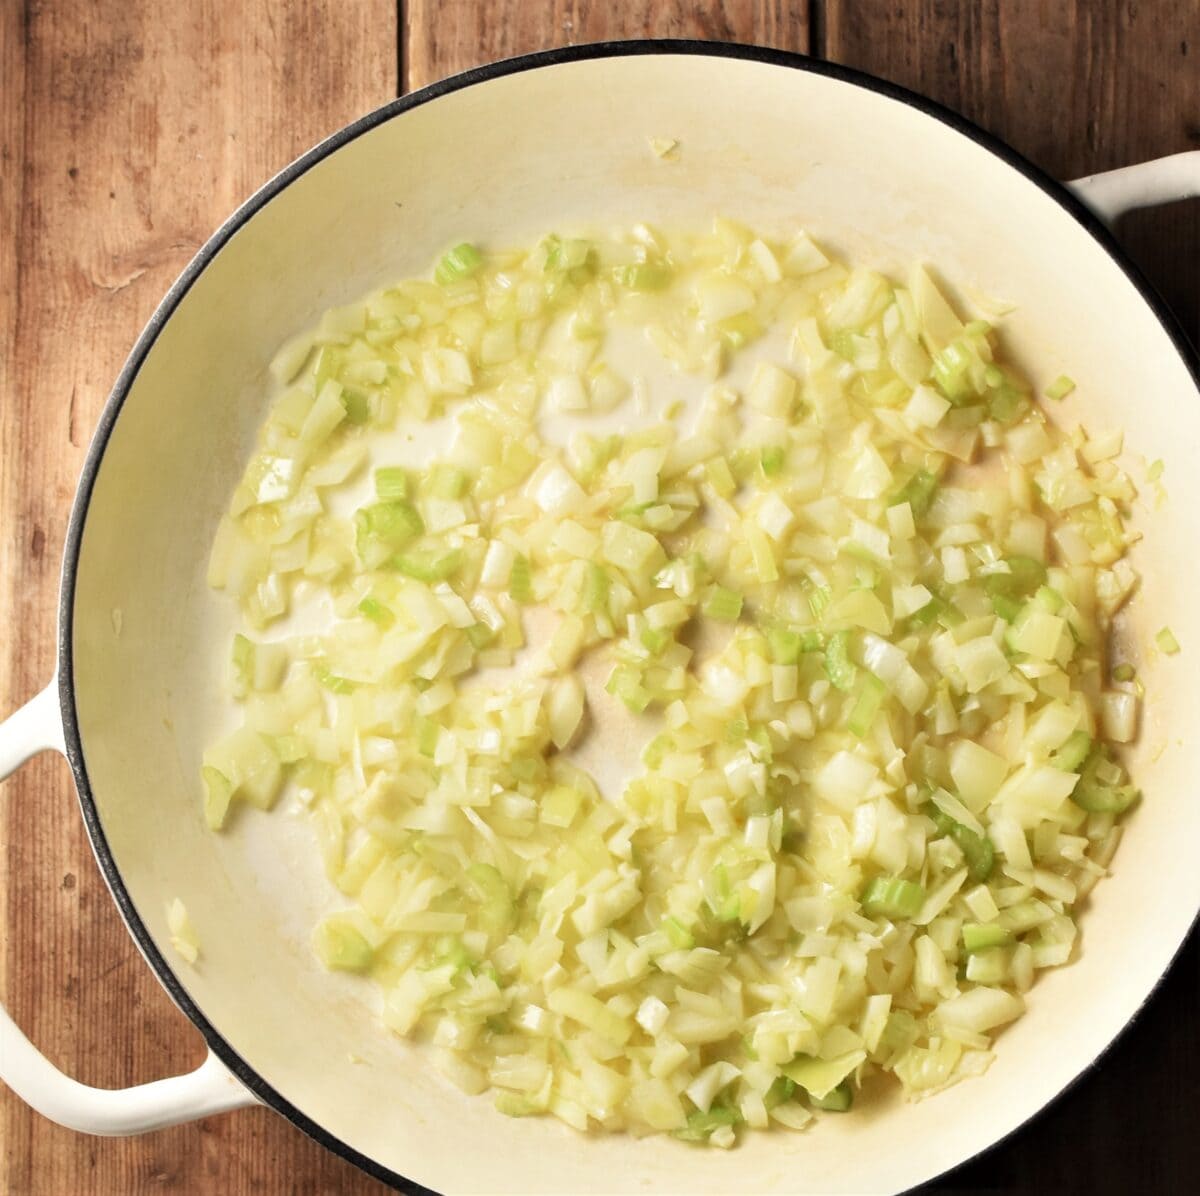 Chopped onion and celery in large white shallow pan.